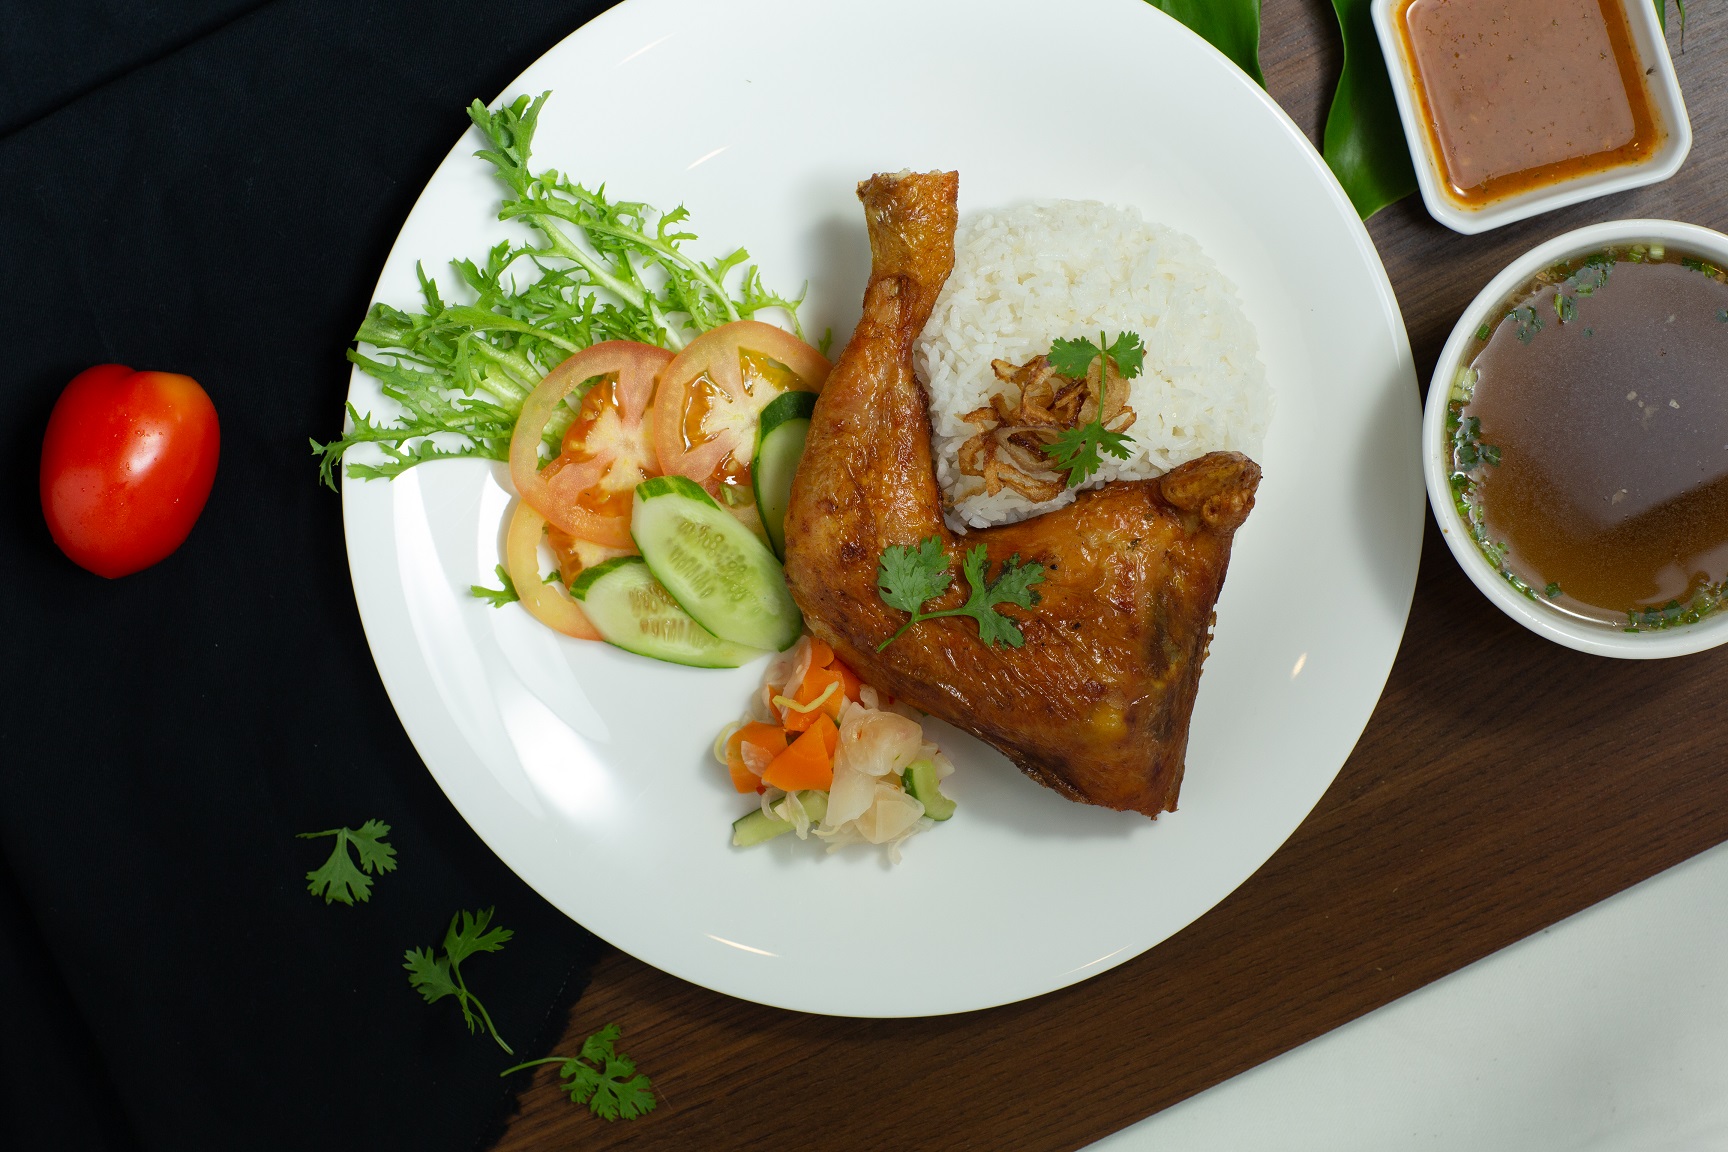 02.DEEP FRIED CHICKEN LEG WITH STEAMED RICE